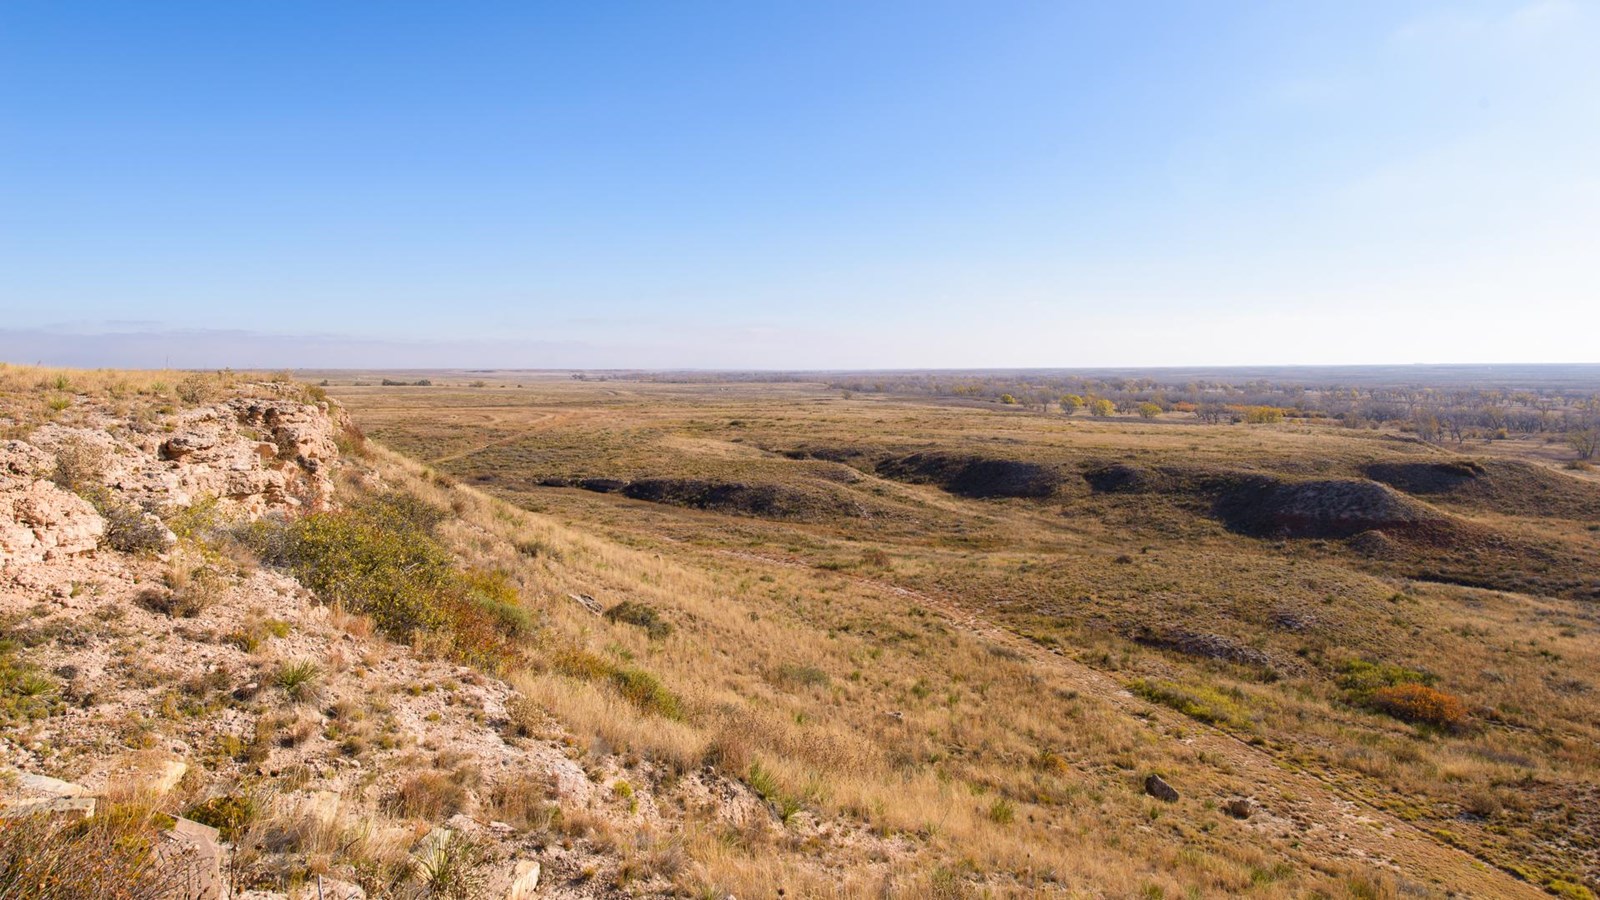 Looking from a stone bluff out onto an expansive grassland.